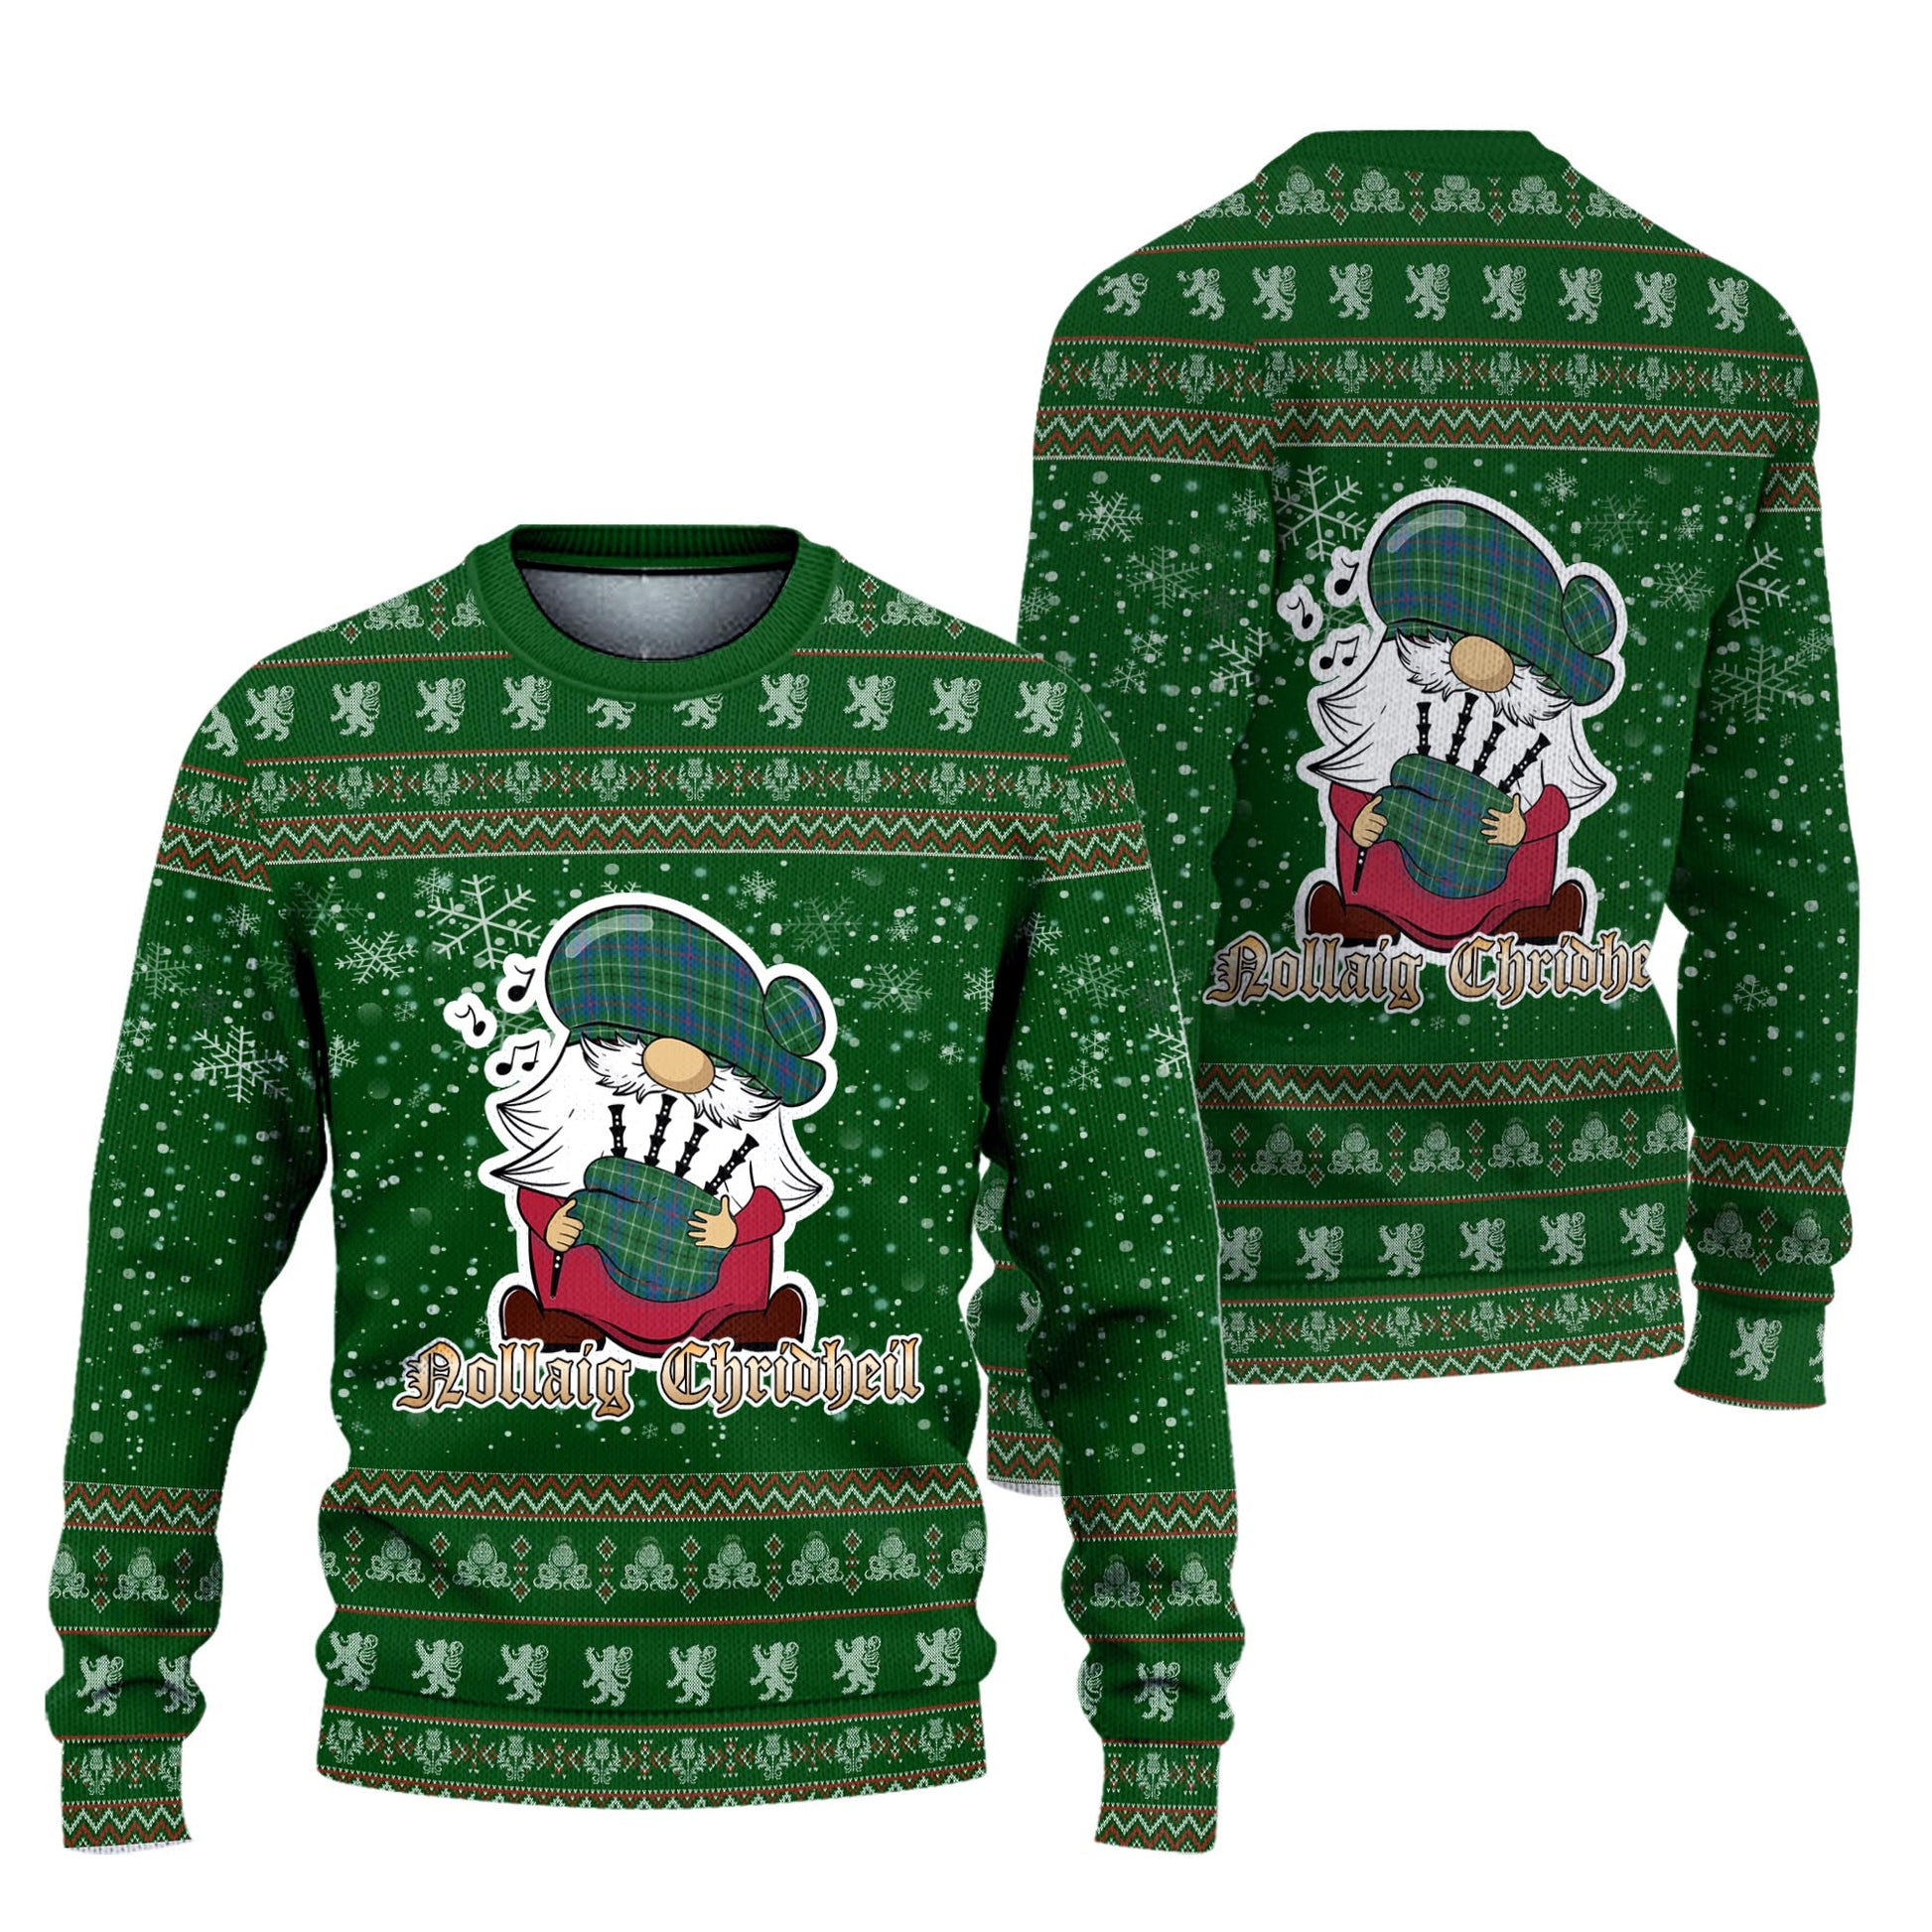 Duncan Ancient Clan Christmas Family Knitted Sweater with Funny Gnome Playing Bagpipes Unisex Green - Tartanvibesclothing